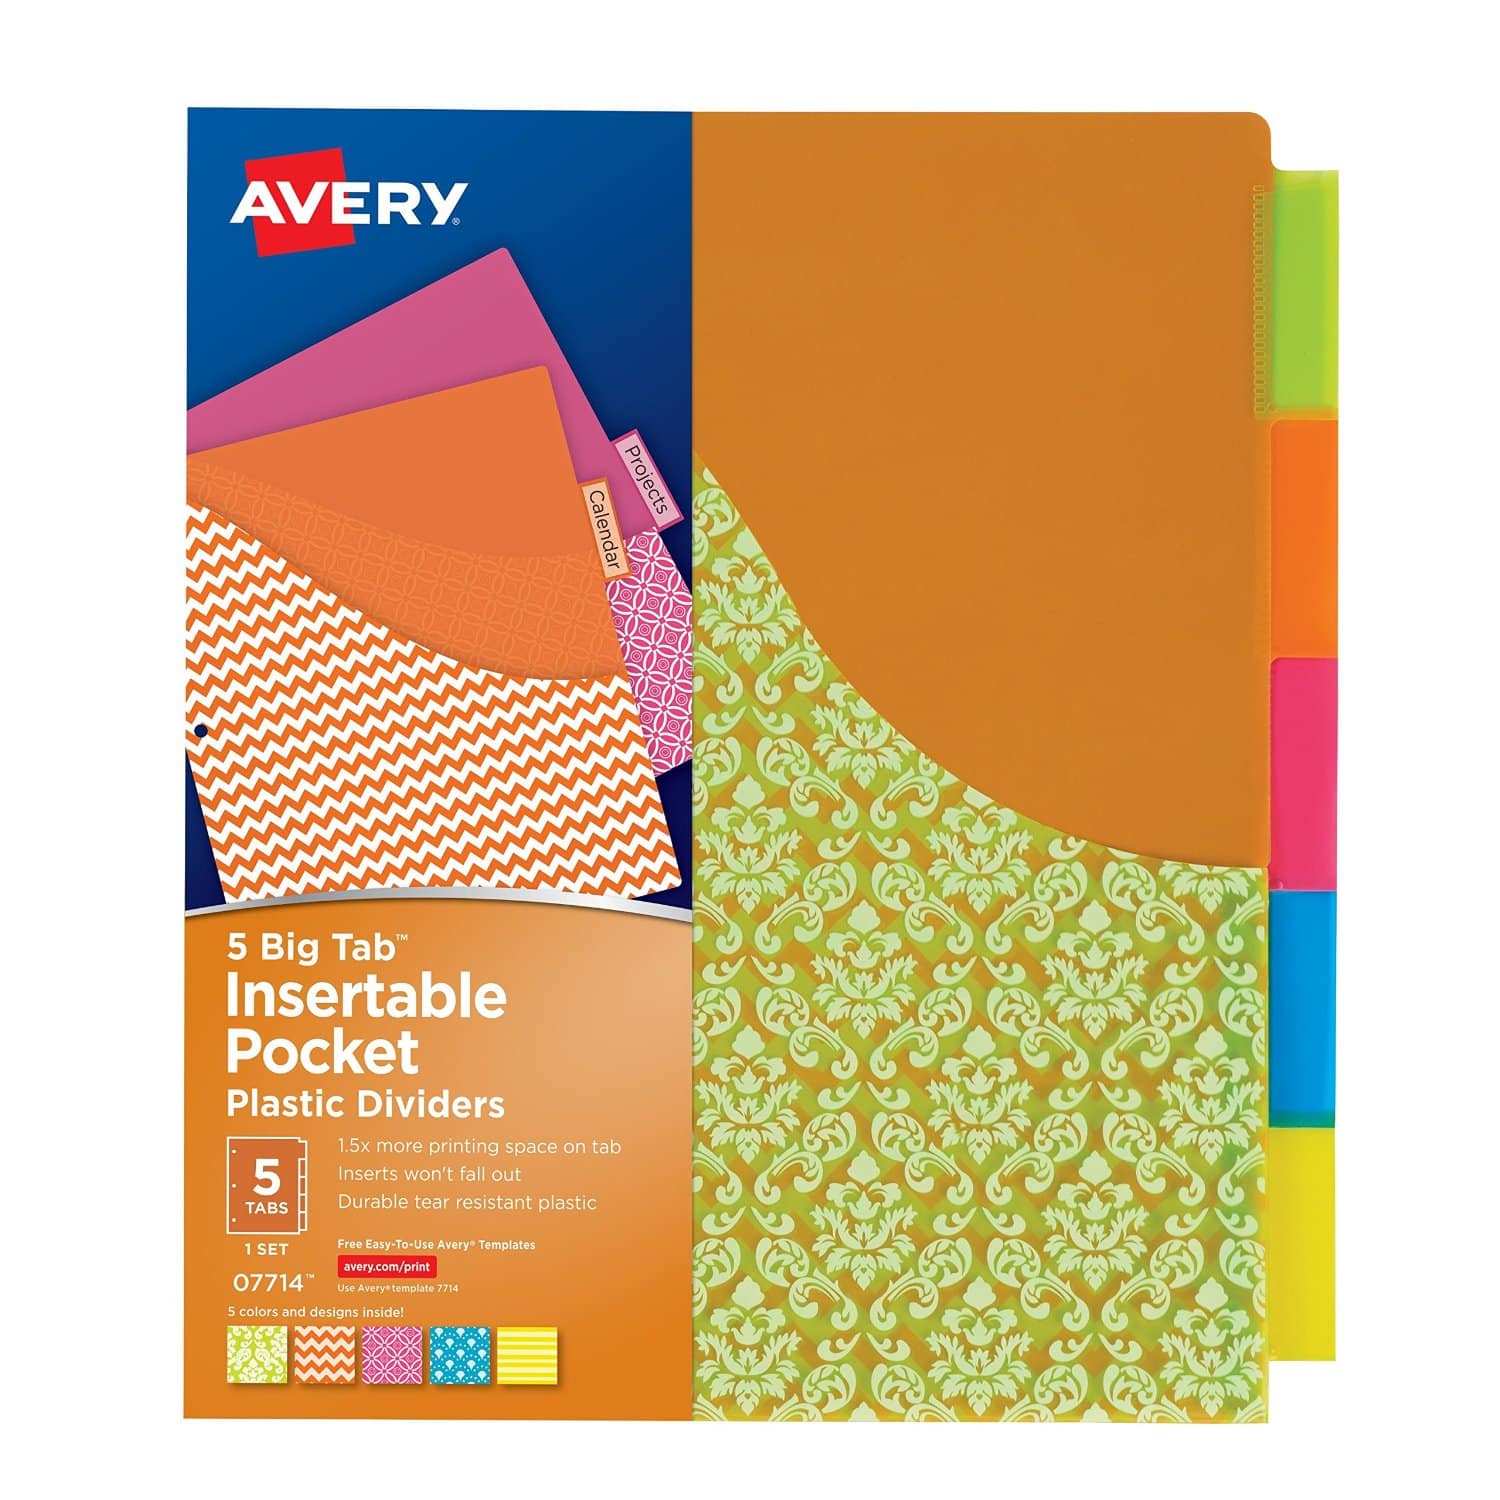 DEAL ALERT: Big Tab Insertable Plastic Dividers with Pockets, 5 Tabs